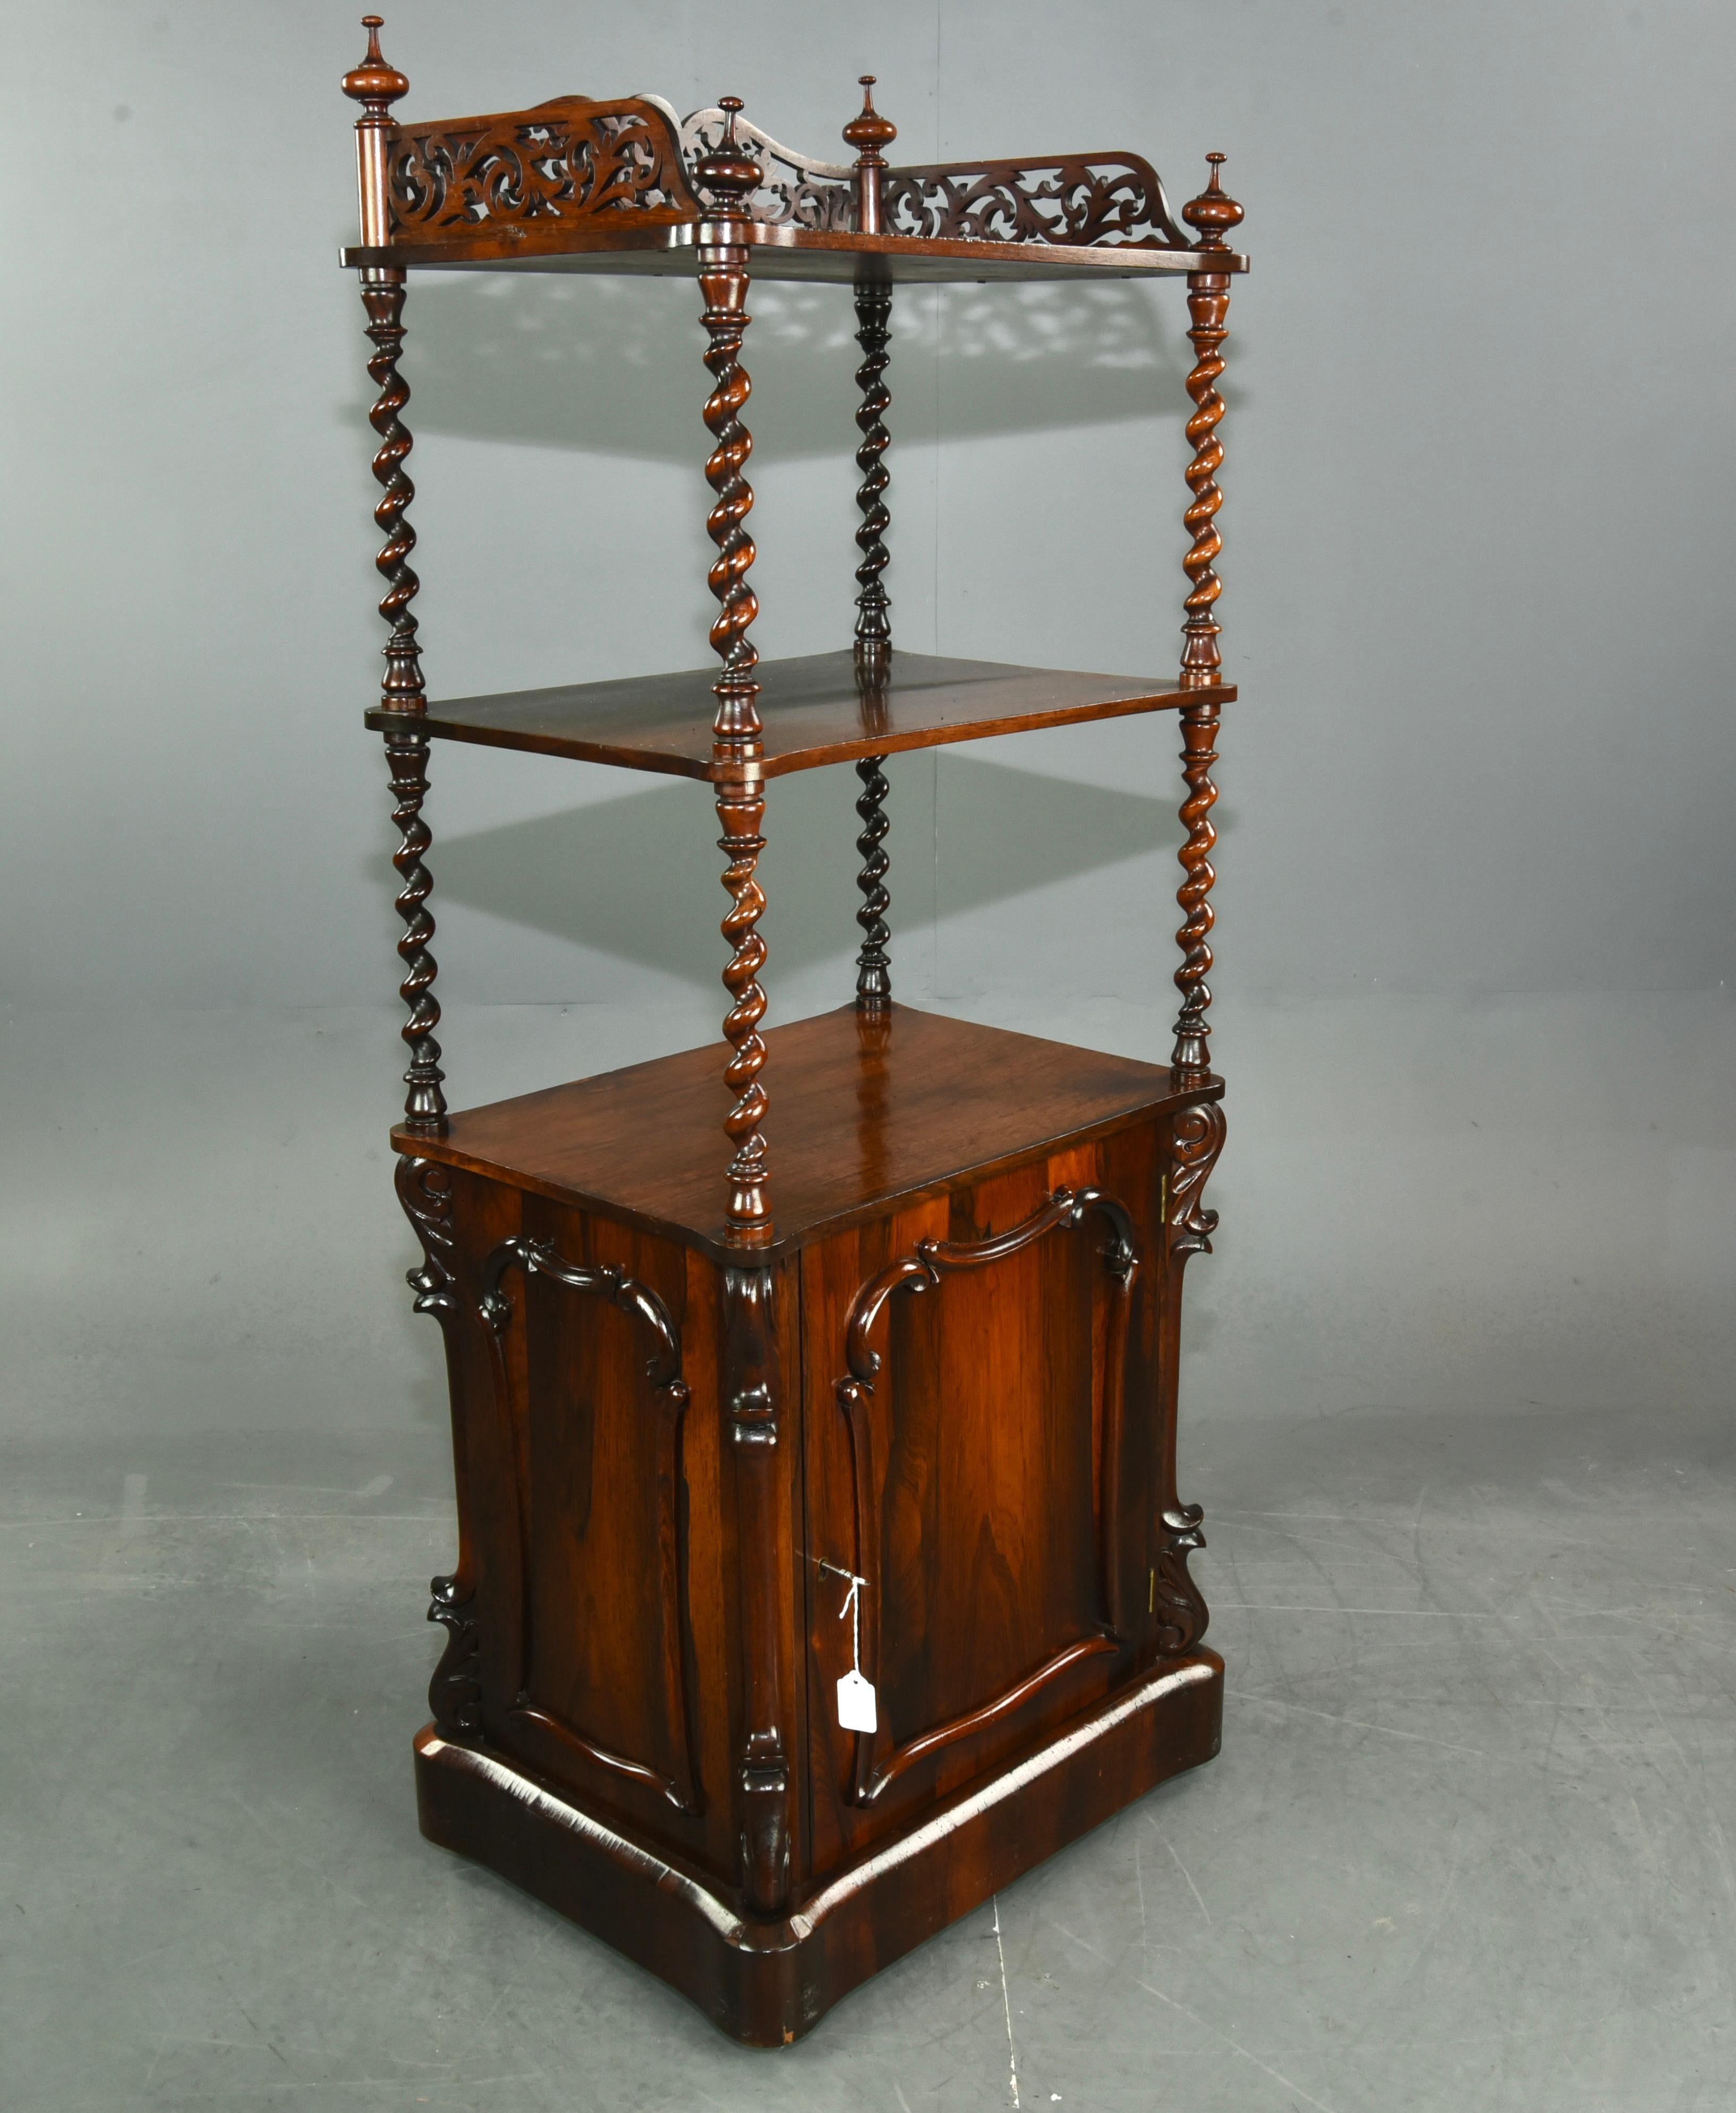 Fine Quality Early Victorian Rosewood three tier whatnot.
It is very good condition with no breaks or woodworm a wonderful colour with a great grain.
The shelves are supported by very fine barley twist columns the top shelf has a wonderful